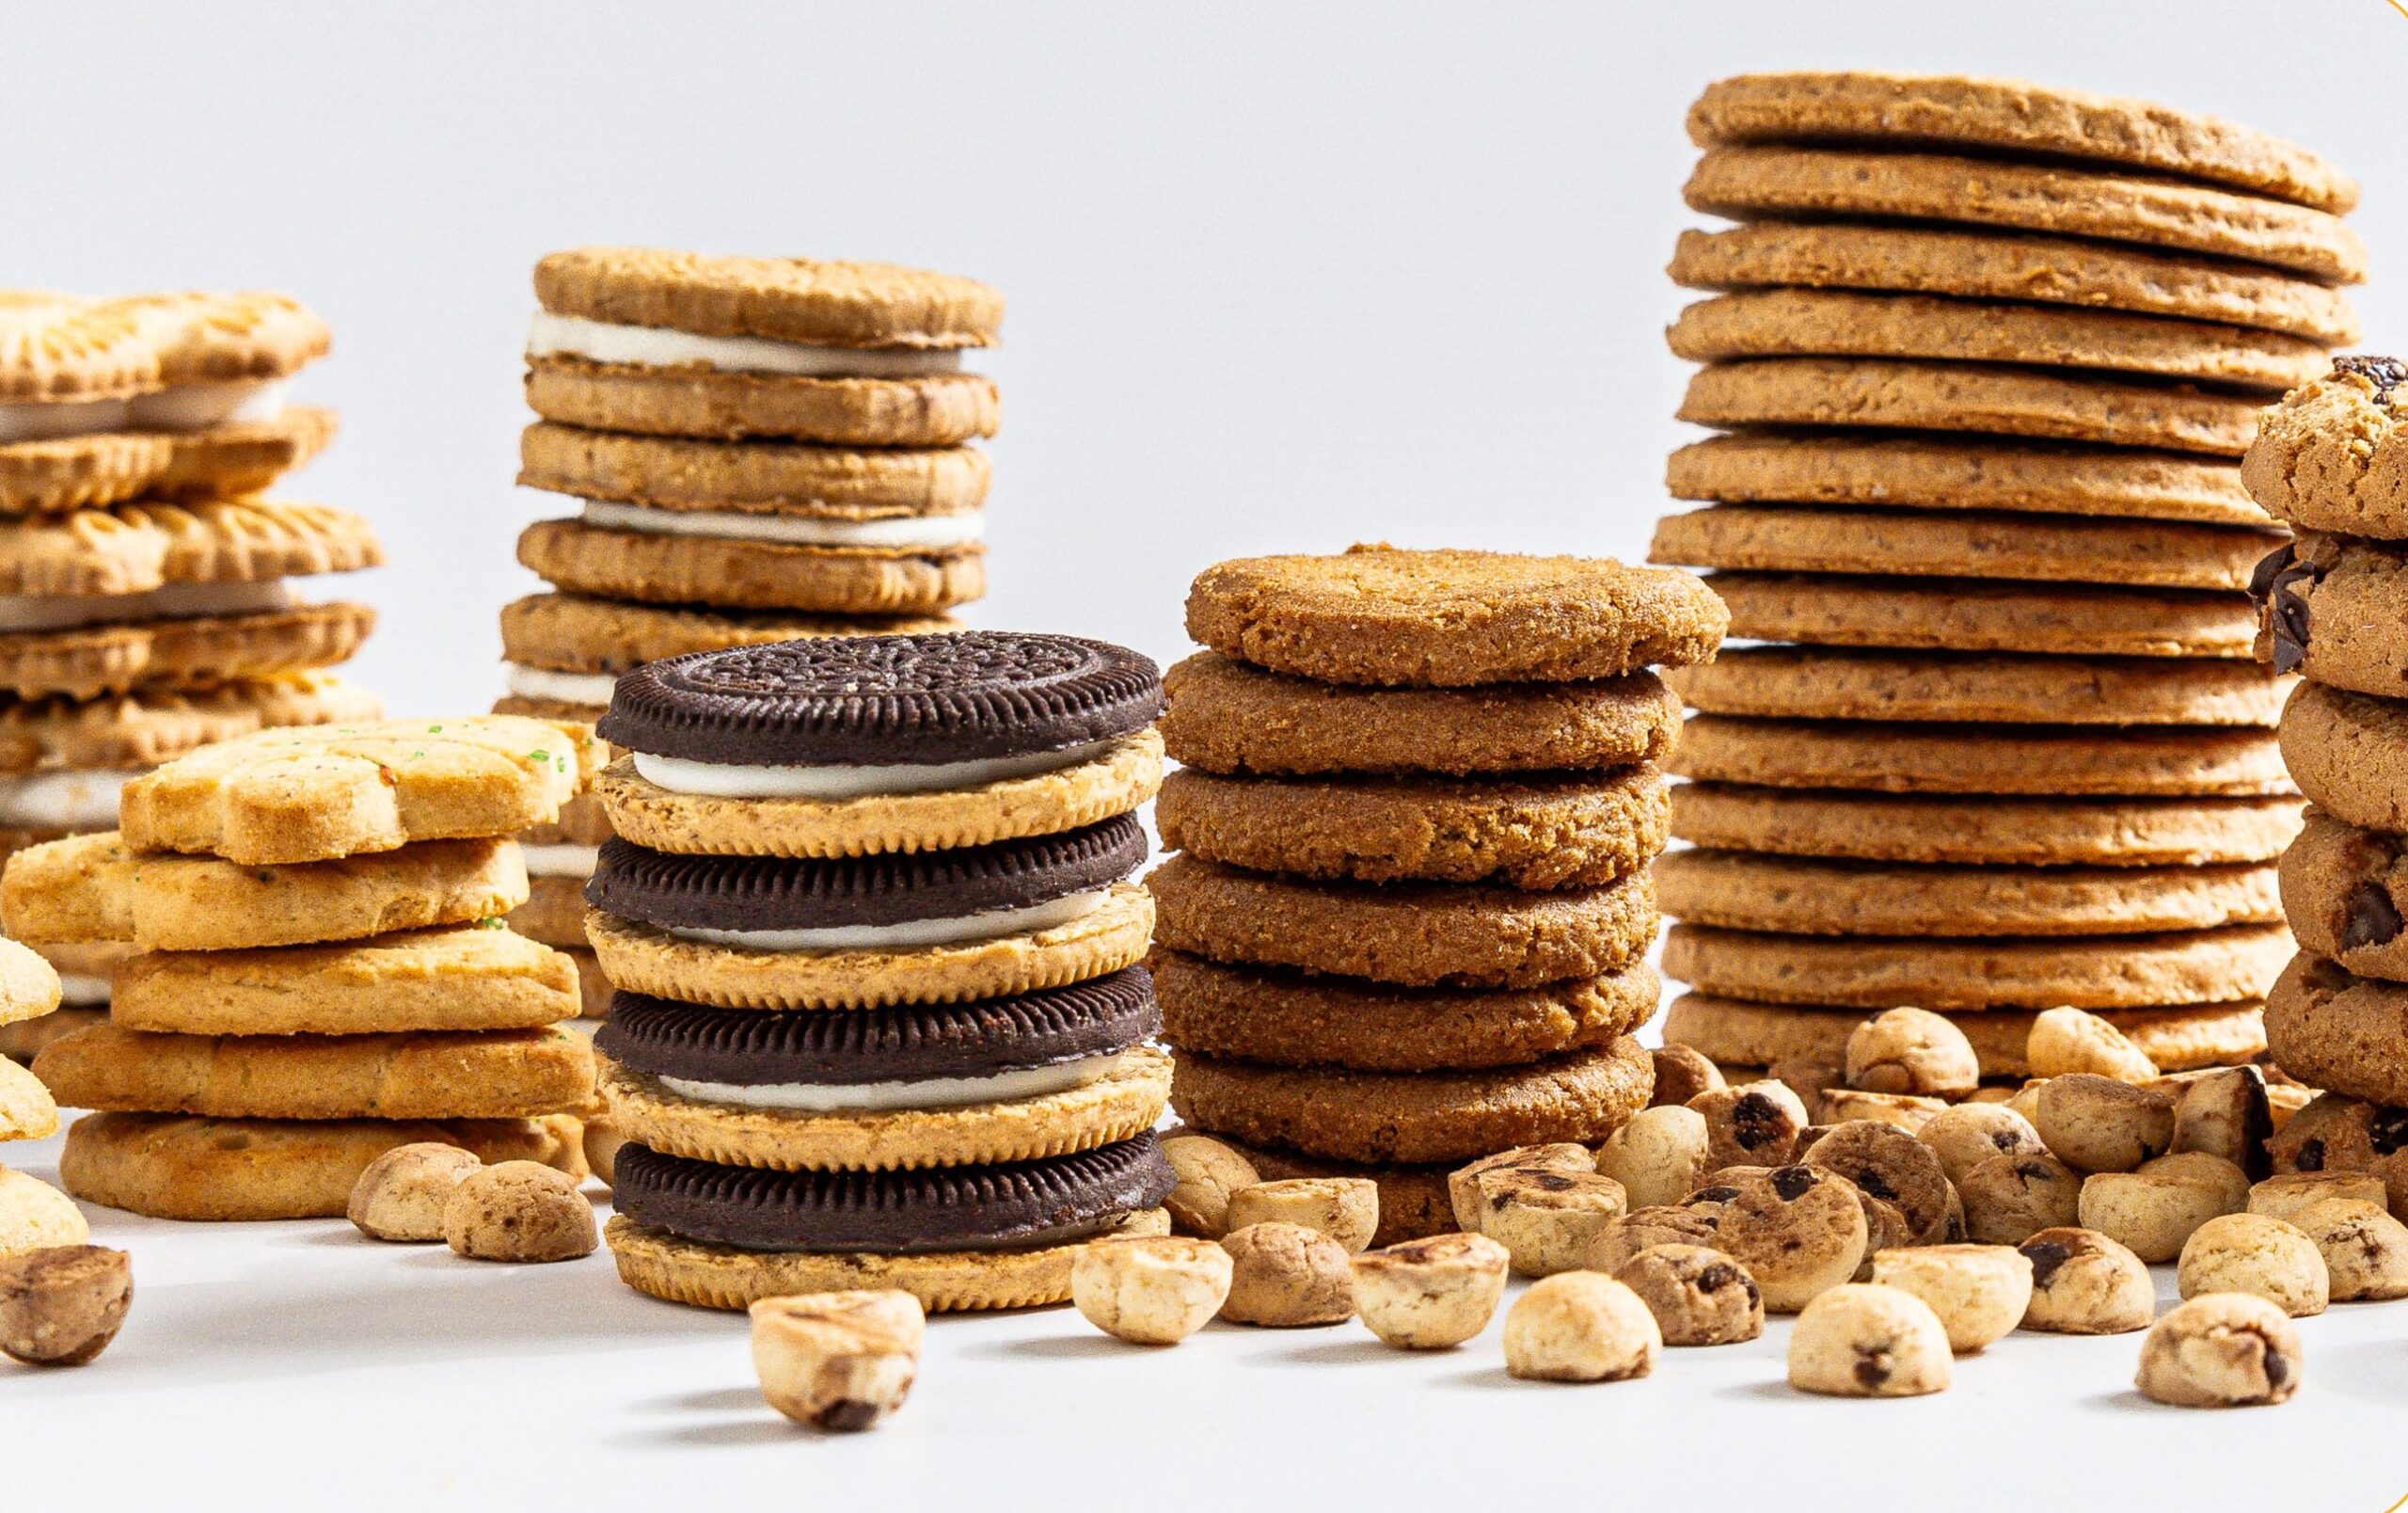 stacks of various private label cookie types